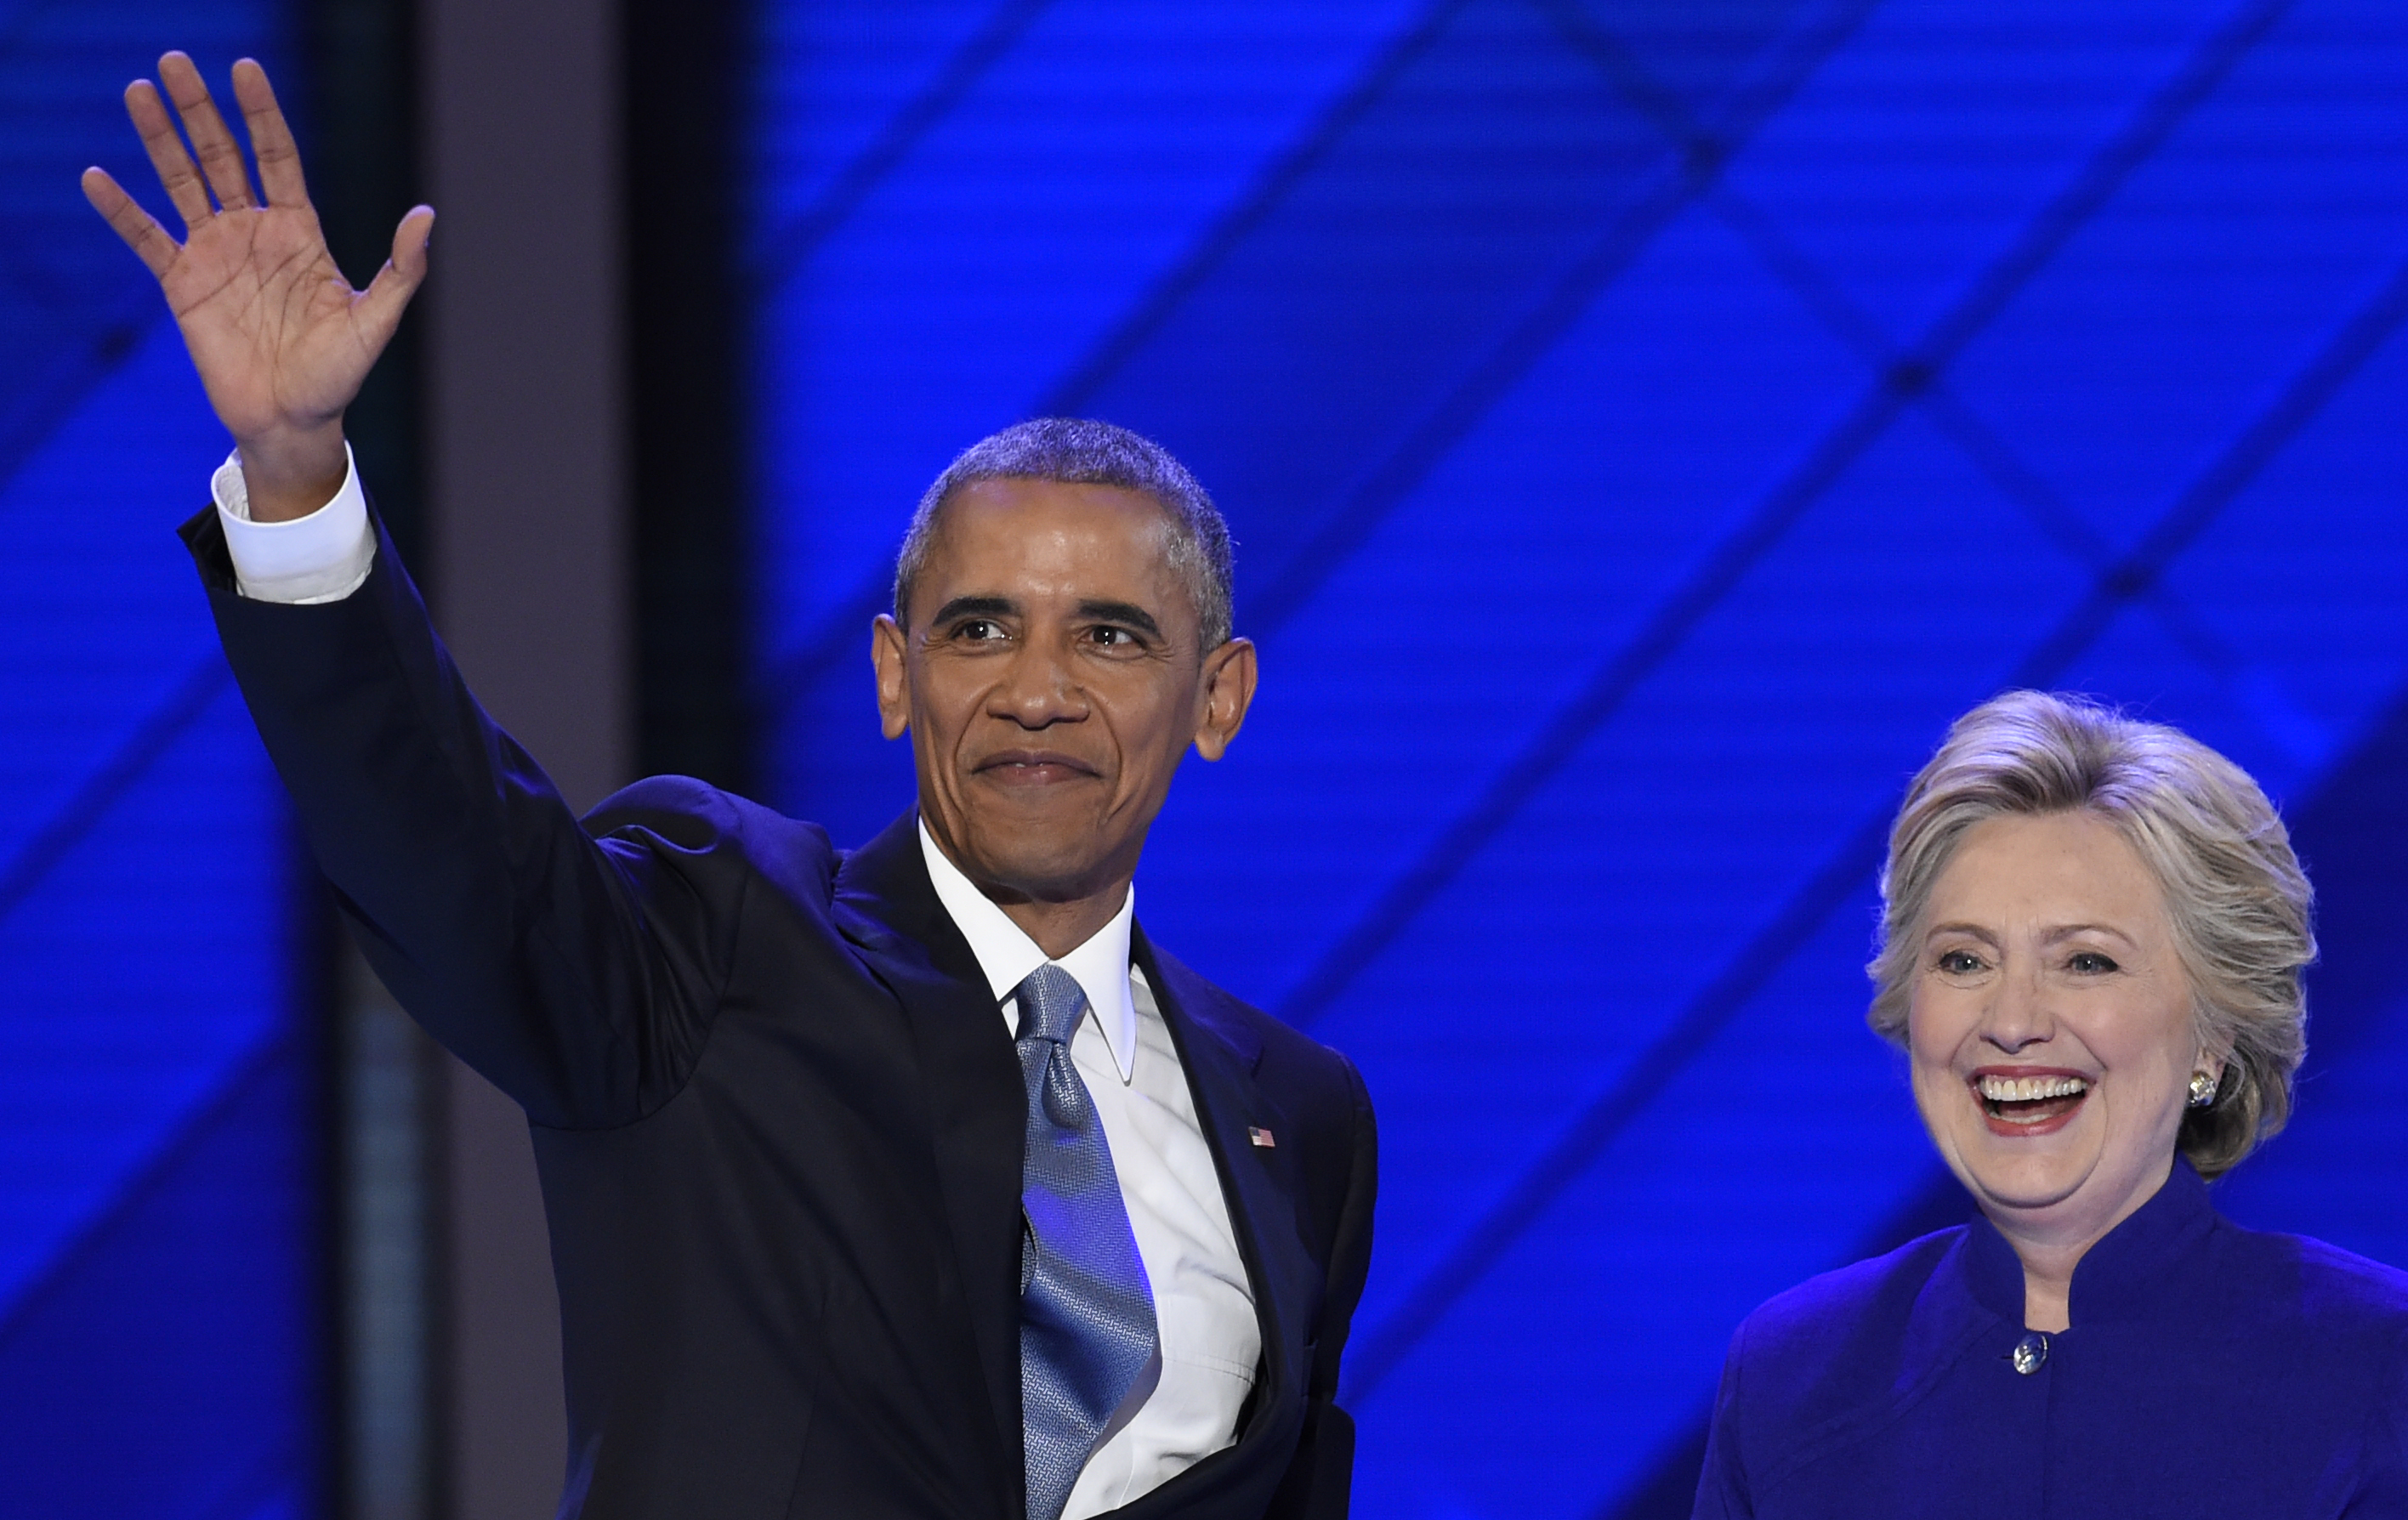 US President Barack Obama stands on stage with Democratic presidential nominee Hillary Clinton during Day 3 of the Democratic National Convention at the Wells Fargo Center, July 27, 2016 in Philadelphia, Pennsylvania.      / AFP PHOTO / SAUL LOEB